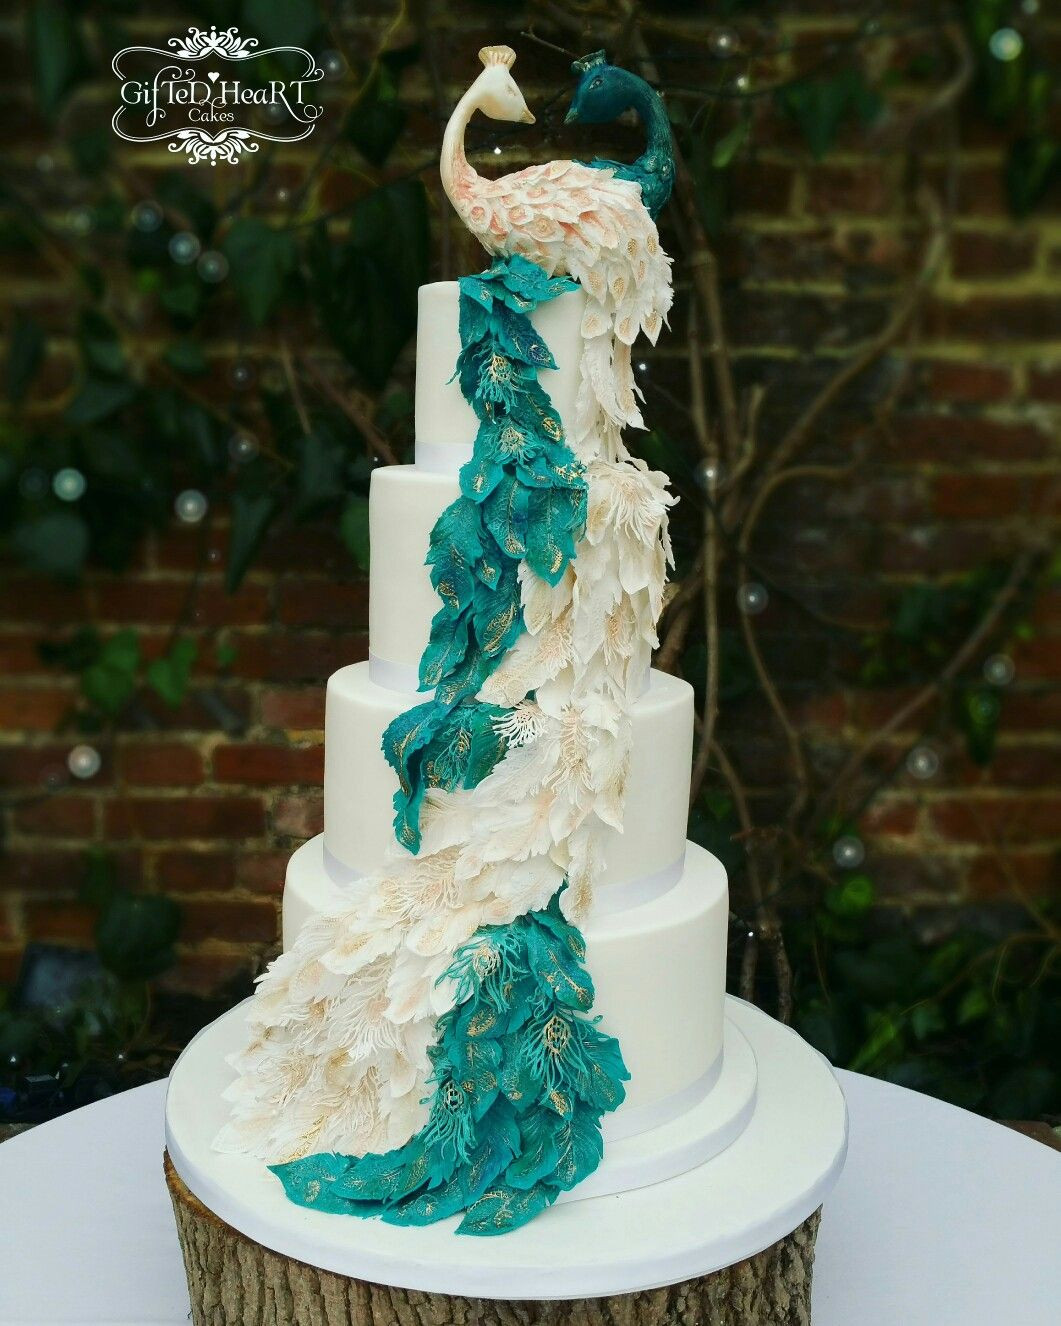 Peacock Wedding Cake
 Pin by Jenny Carter on Tiered Cakes in 2019